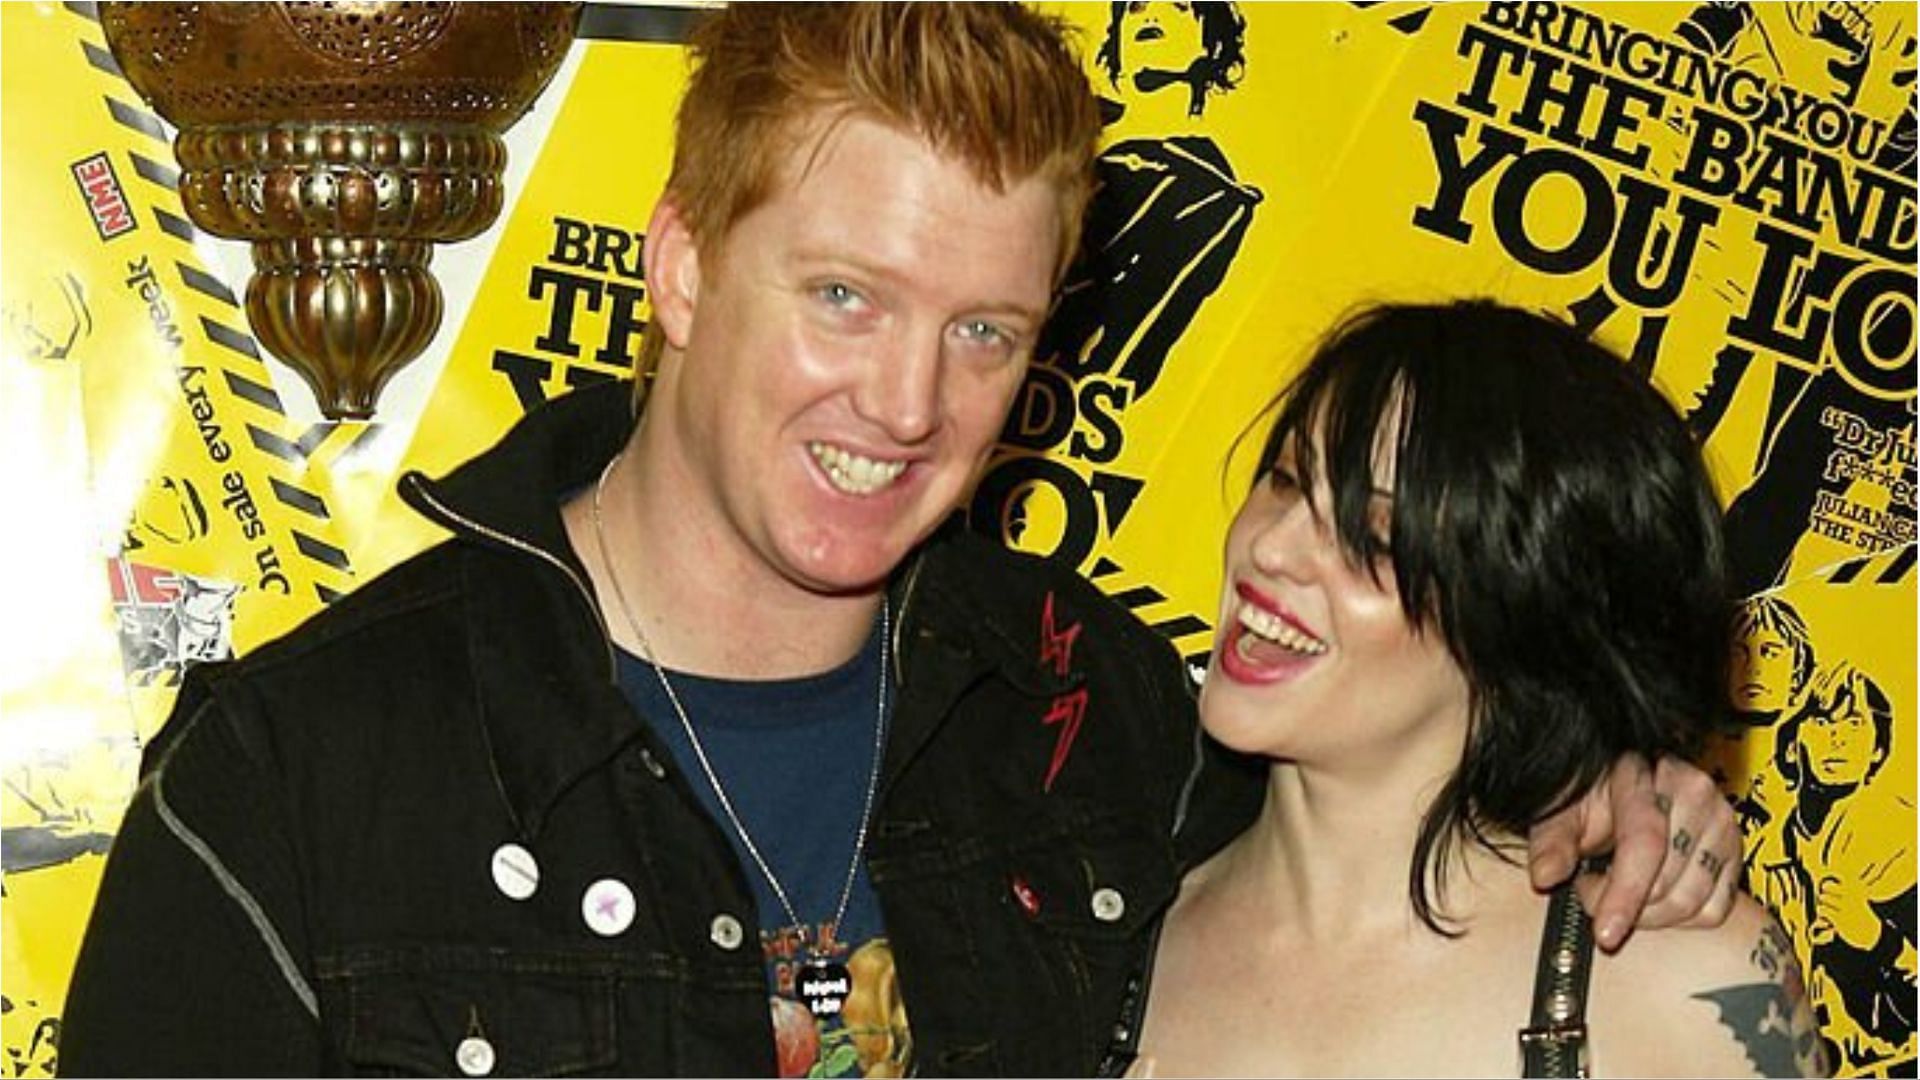 Josh Homme&#039;s statement mentioned that Brody Dalle violated court orders (Image via Dave Hogan/Getty Images)